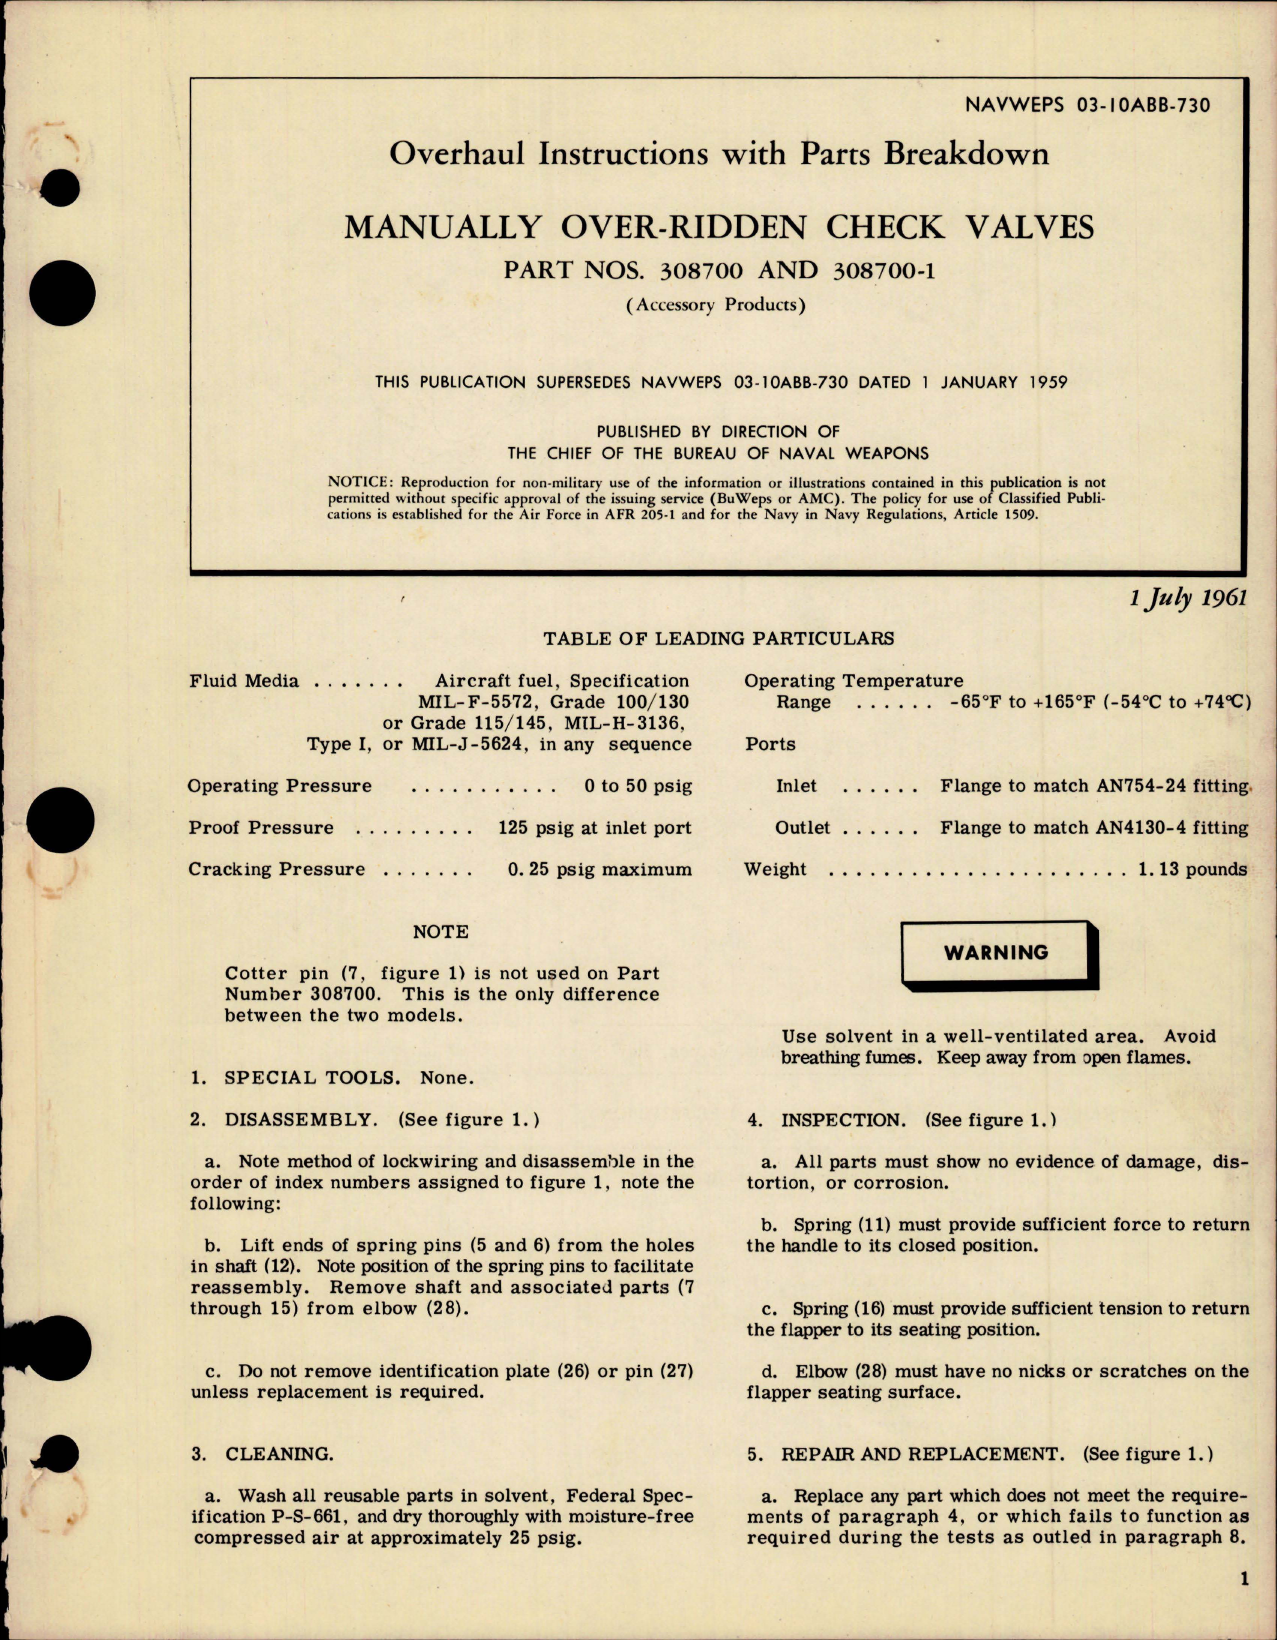 Sample page 1 from AirCorps Library document: Overhaul Instructions with Parts for Manually Over-Ridden Check Valves - Parts 308700 and 308700-1 